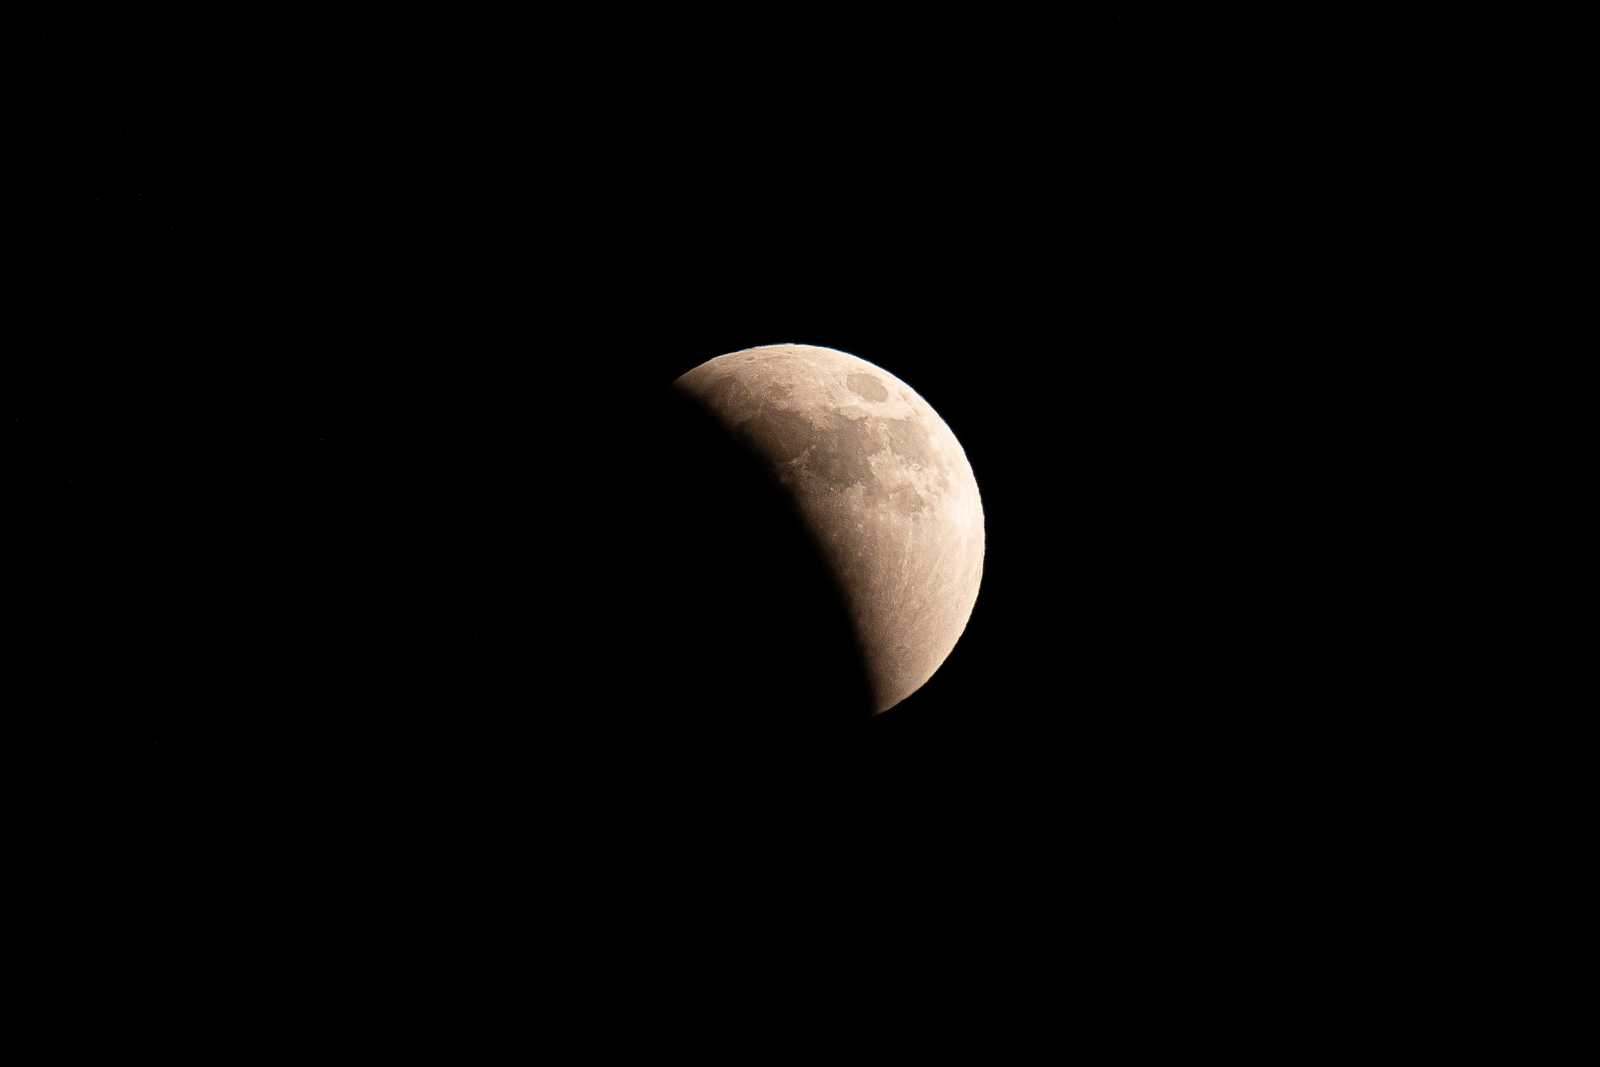 The full moon during a lunar eclipse, showing about half covered in shadow